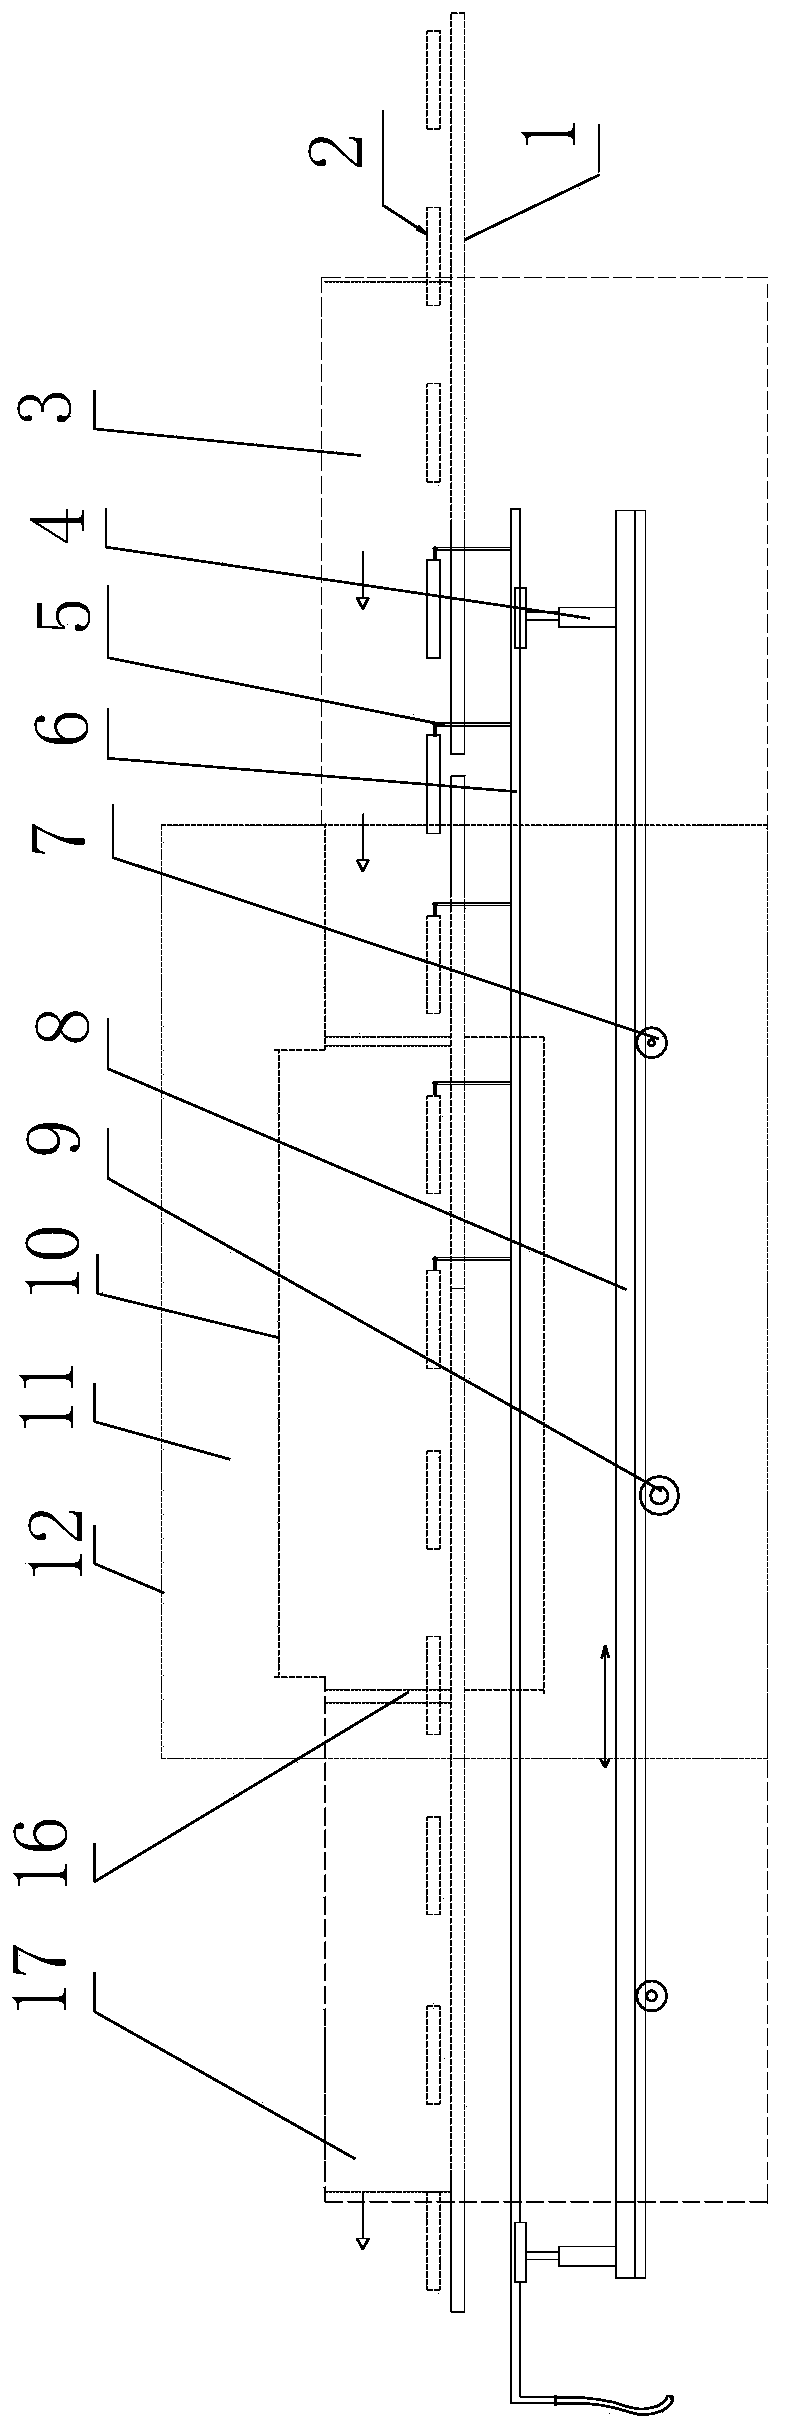 Brazing device and process for interior of cooling plate sealing cavity under inert gas shielding environment